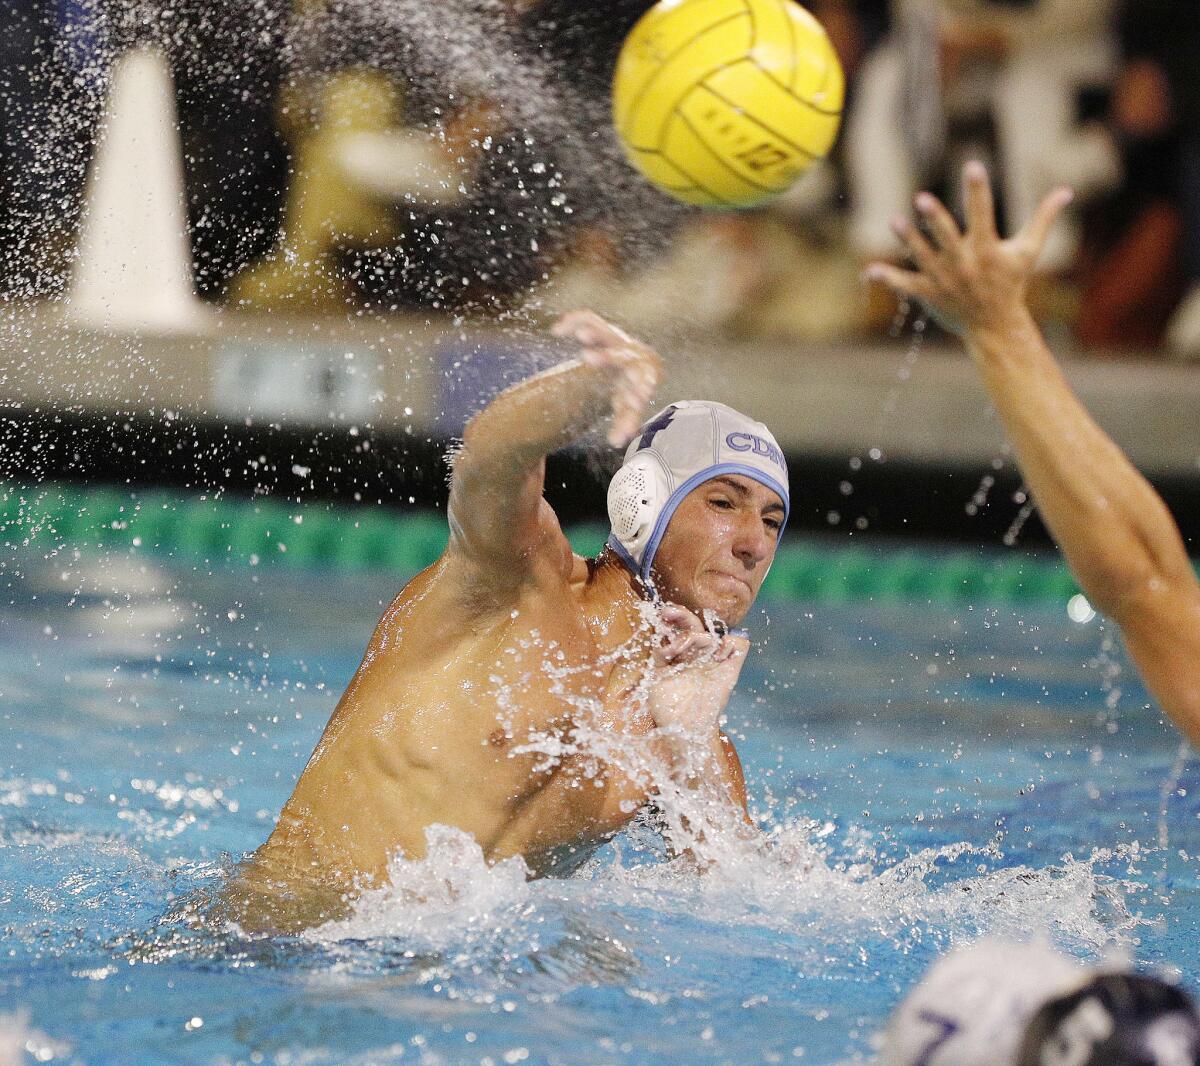 Tyler Harvey, shown shooting against Newport Harbor on Oct. 3, 2018, scored a team-best four goals for the Corona del Mar High boys' water polo team in the Long Beach Poly tournament title match on Saturday.